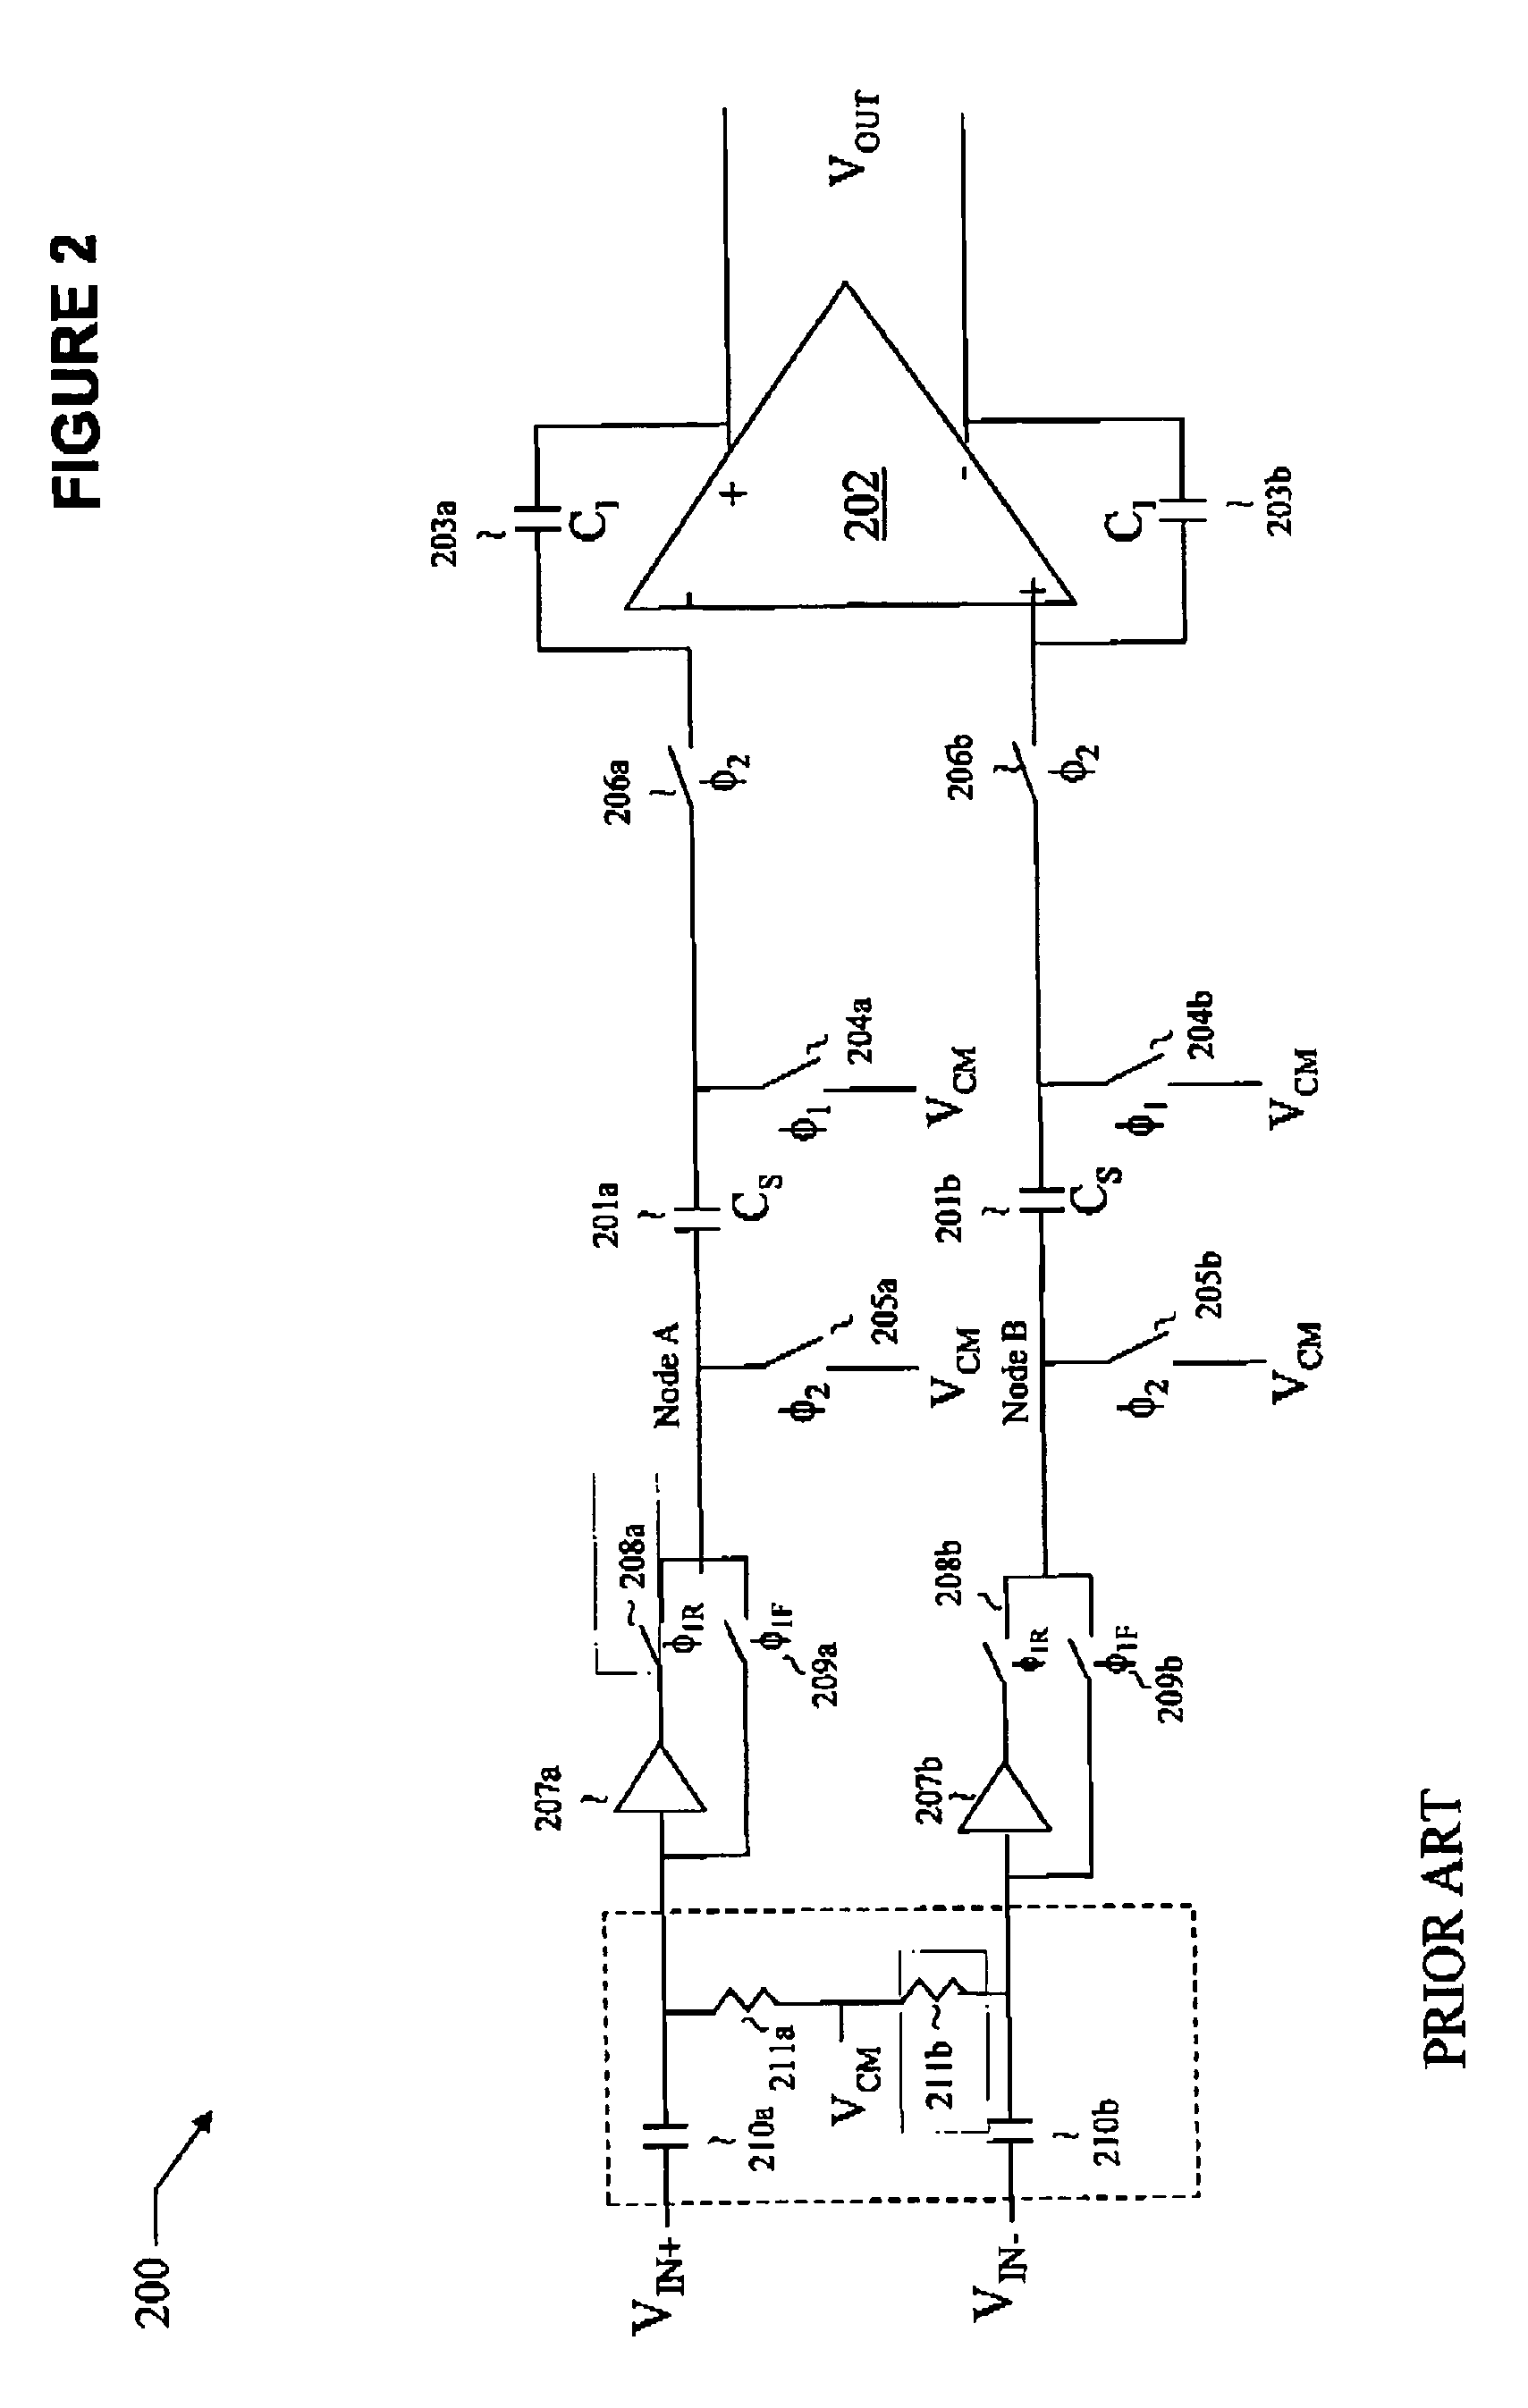 Sample and hold circuits and methods with offset error correction and systems using the same